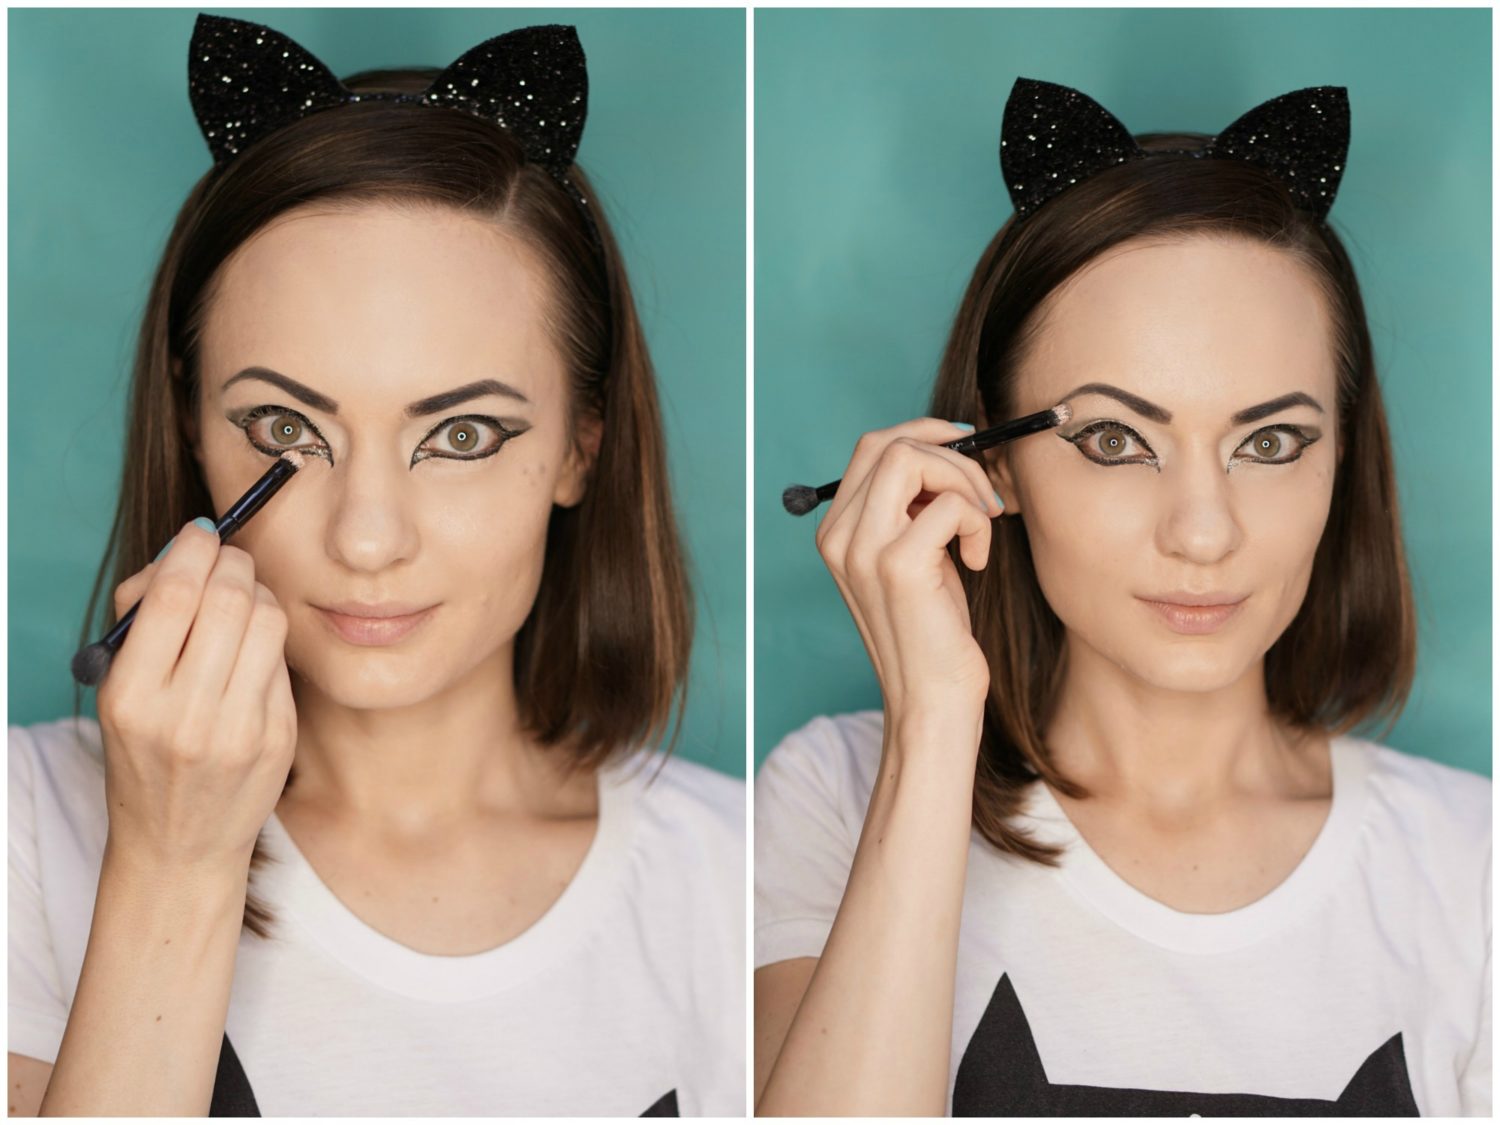 How to Do Cat Makeup Face – Create Your Own Artistic Look